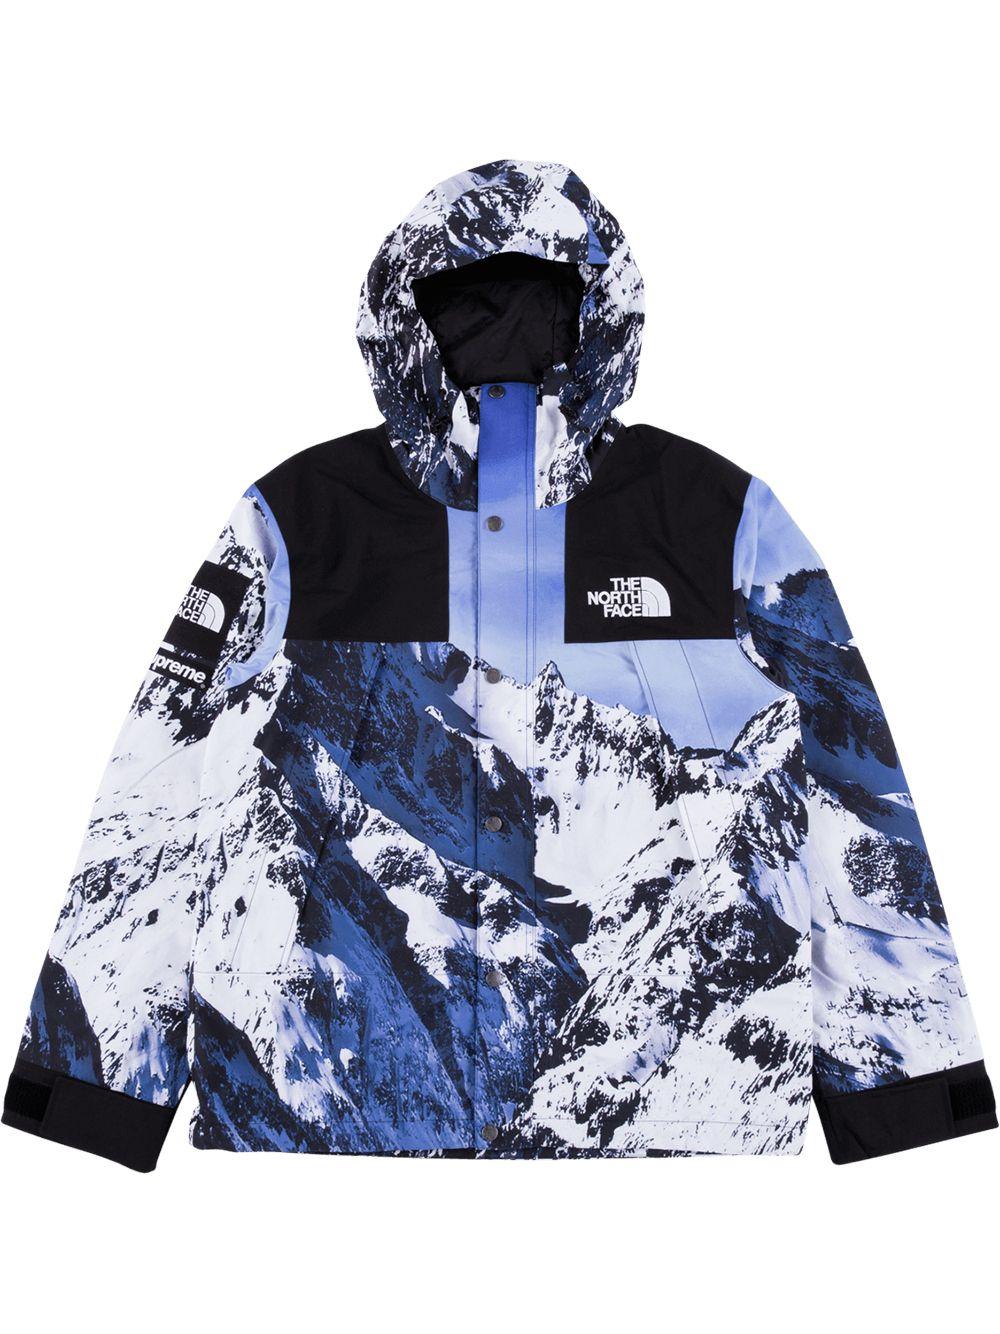 Supreme Supreme X The North Face Mountain Print Parka in Blue for 